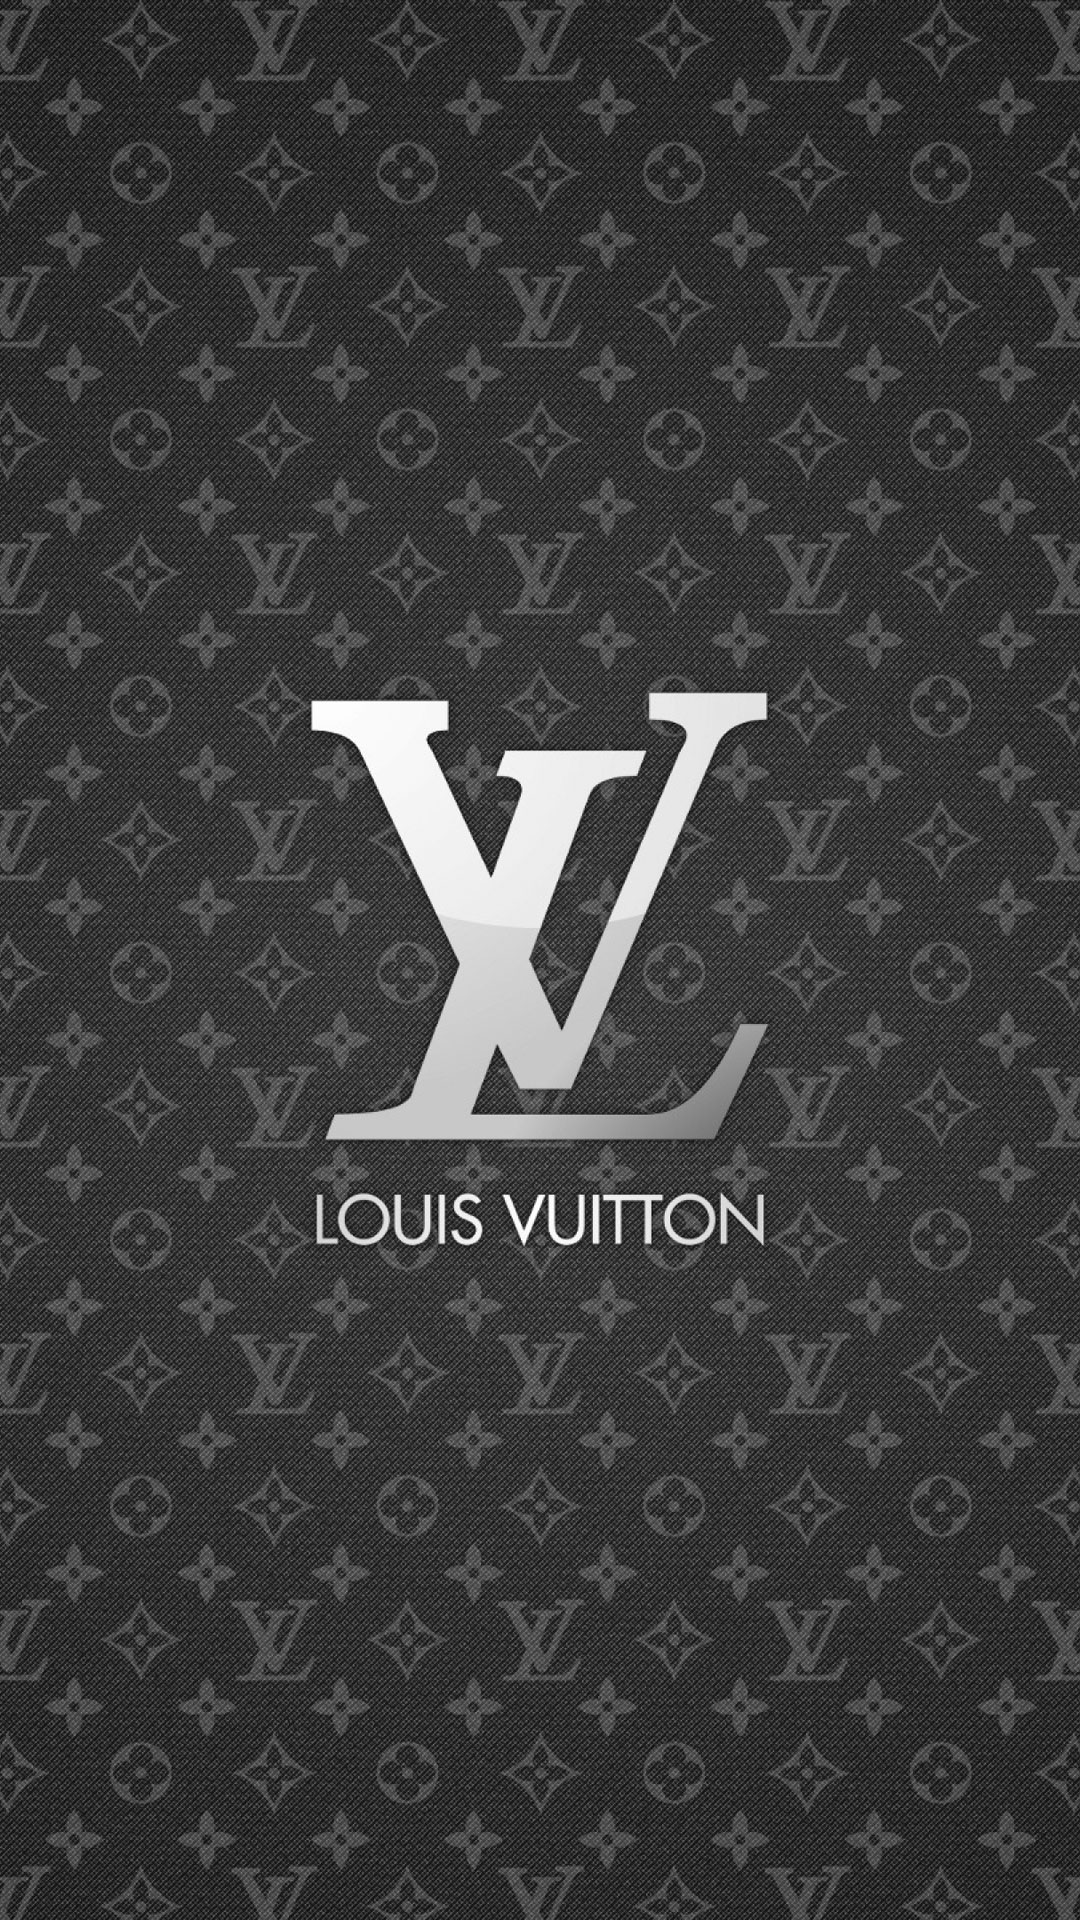 Louis Vuitton Wallpaper For Iphone The Art Of Mike Mignola